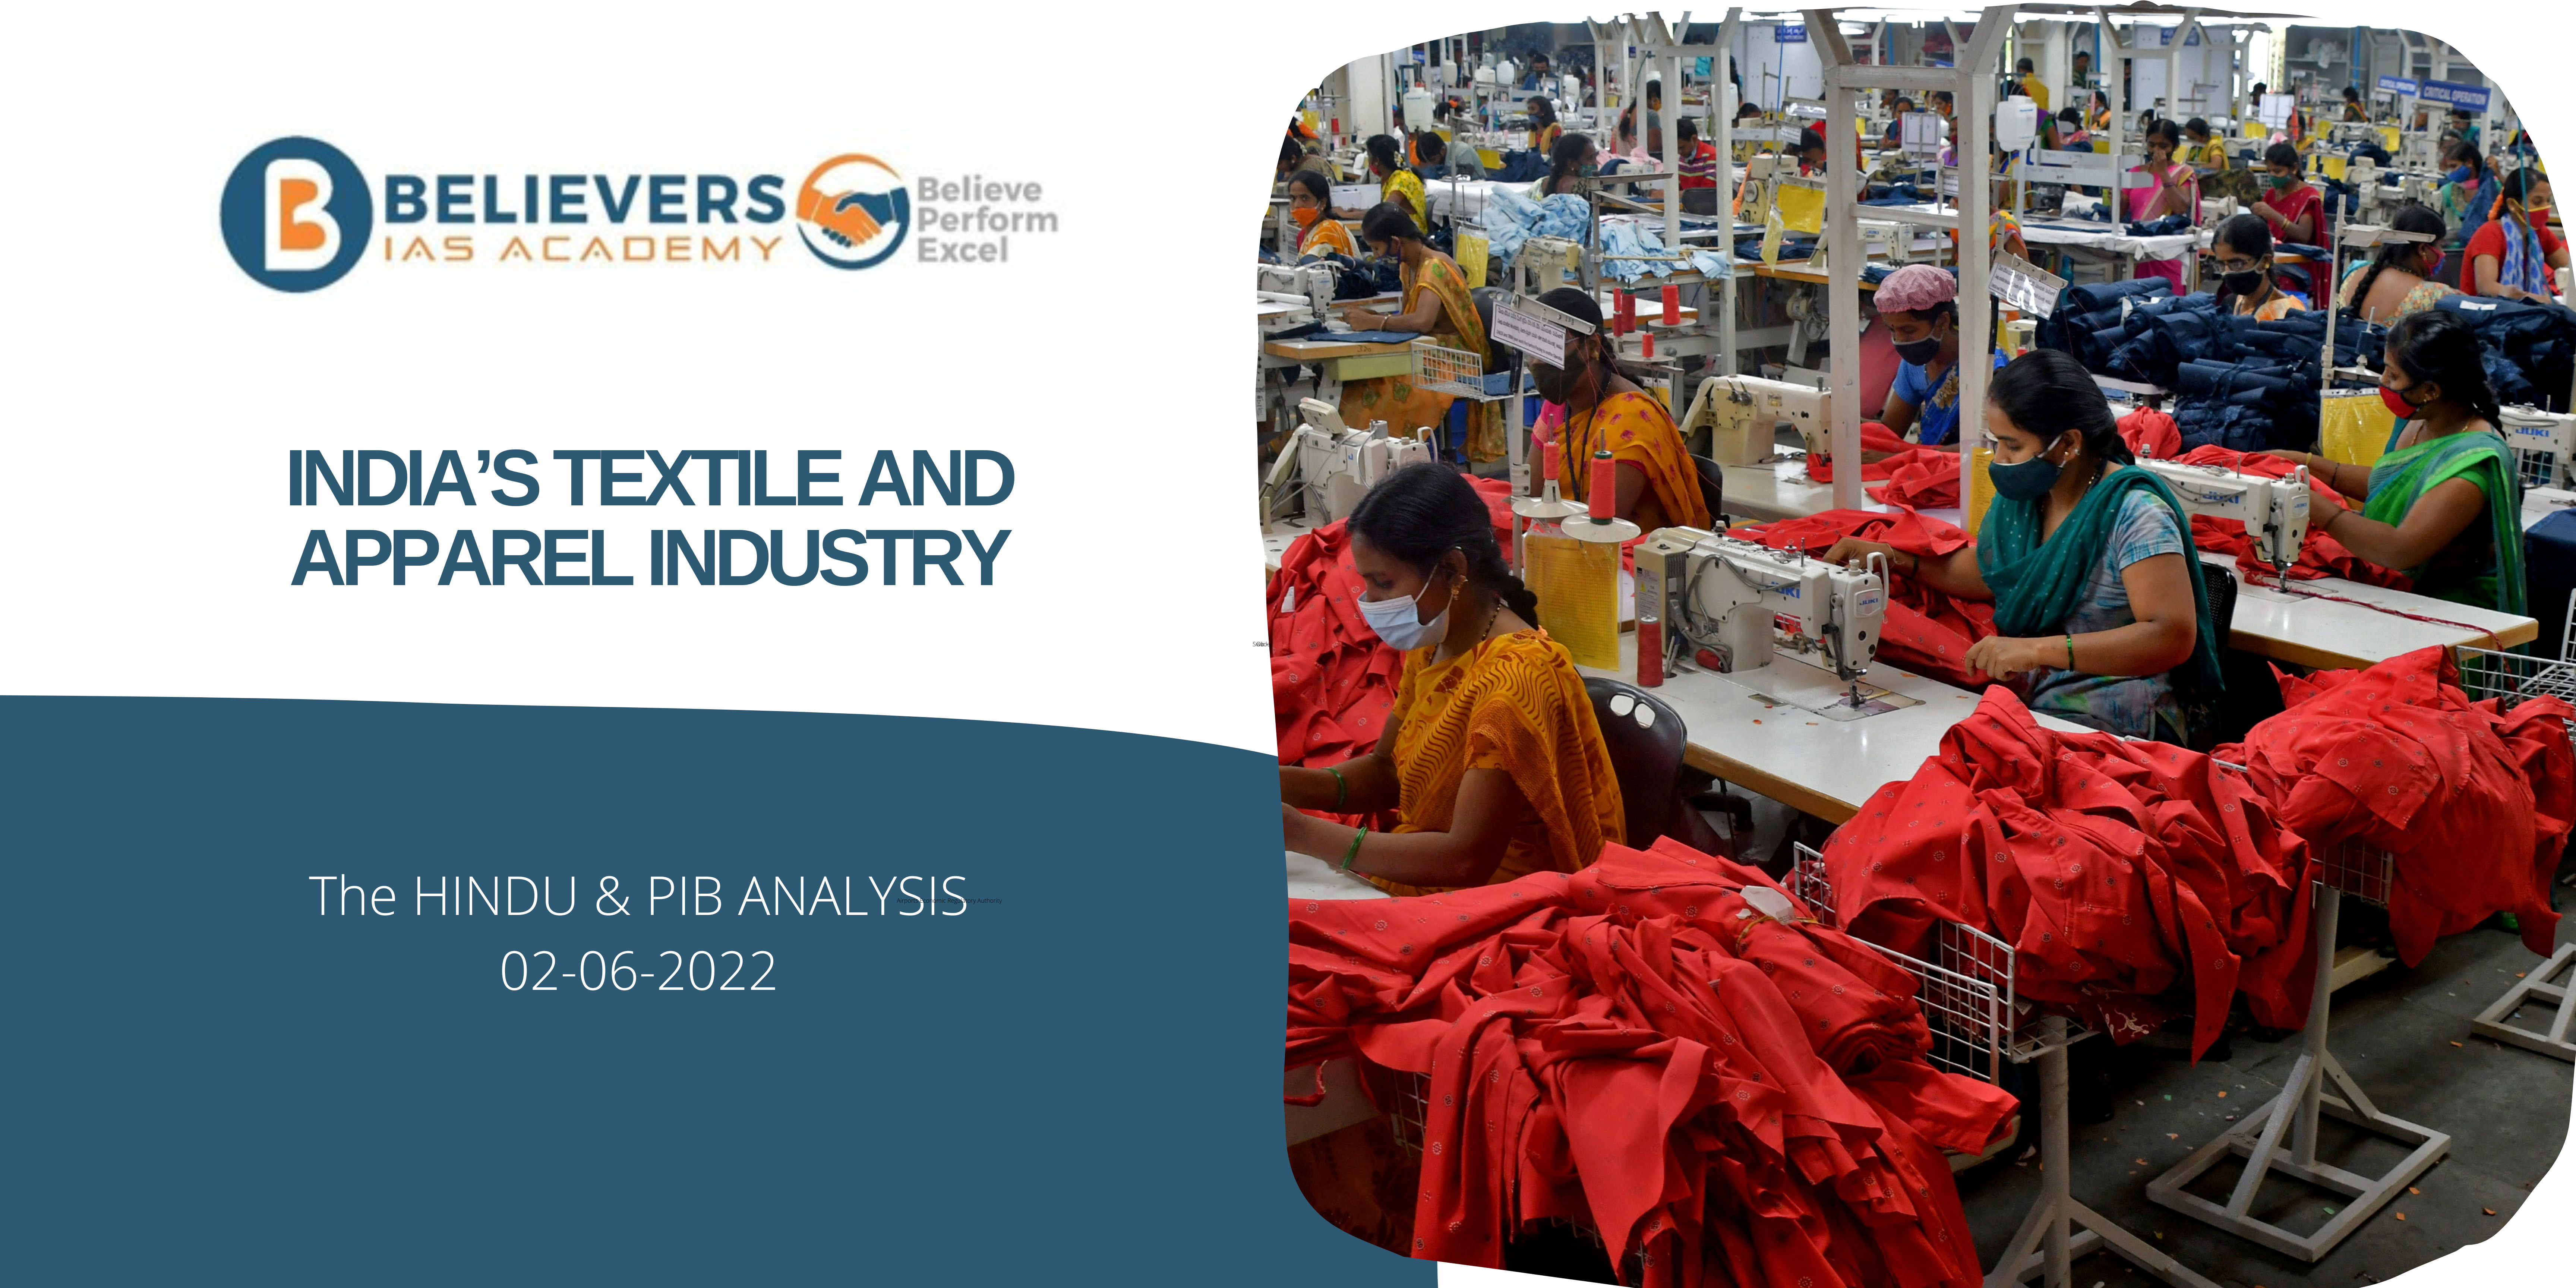 UPSC Current affairs - India’s Textile and Apparel Industry